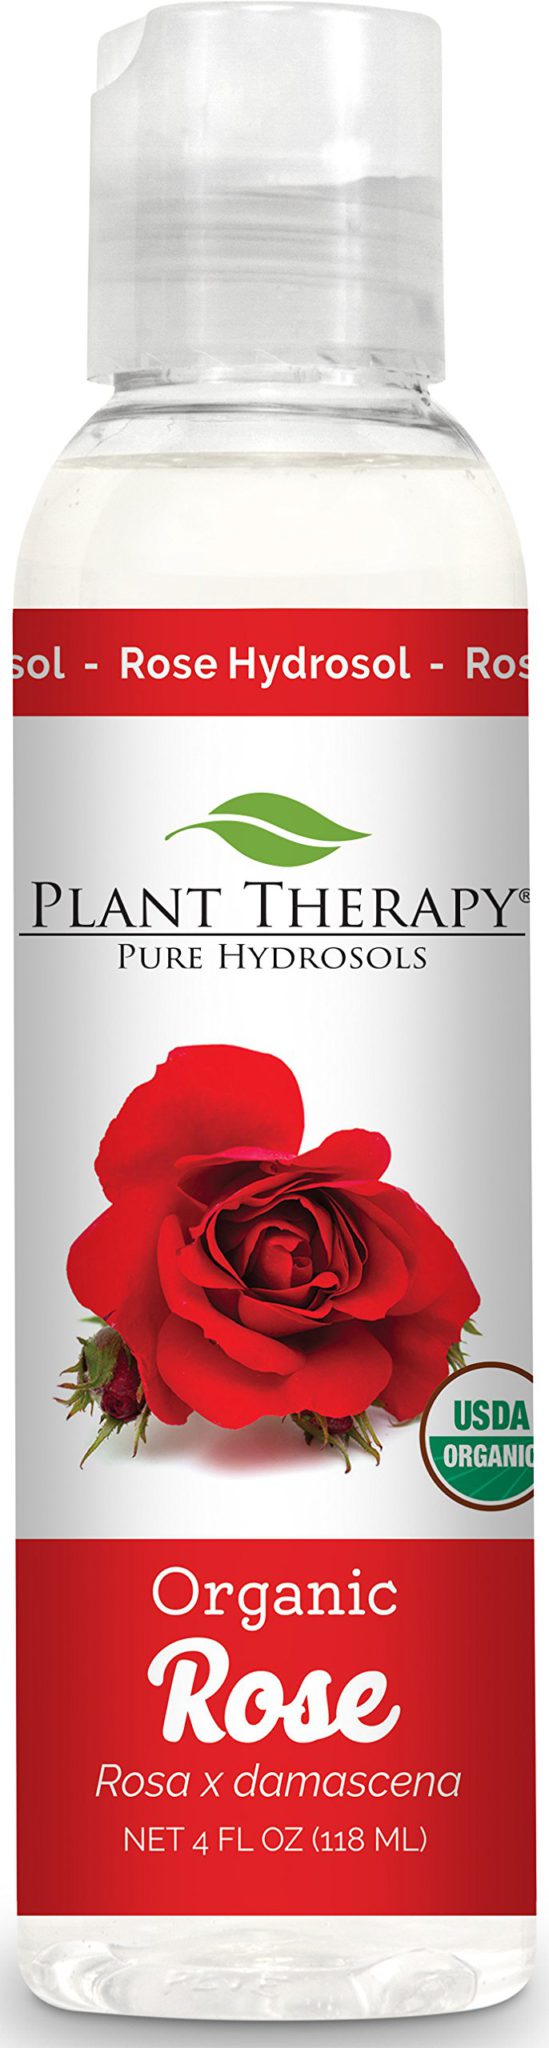 Plant Therapy Organic Rose Hydrosol. (Flower Water, Floral Water, Hydrolats, Distillates) Bi-Product of Essential Oils. 4 oz. - $20.95